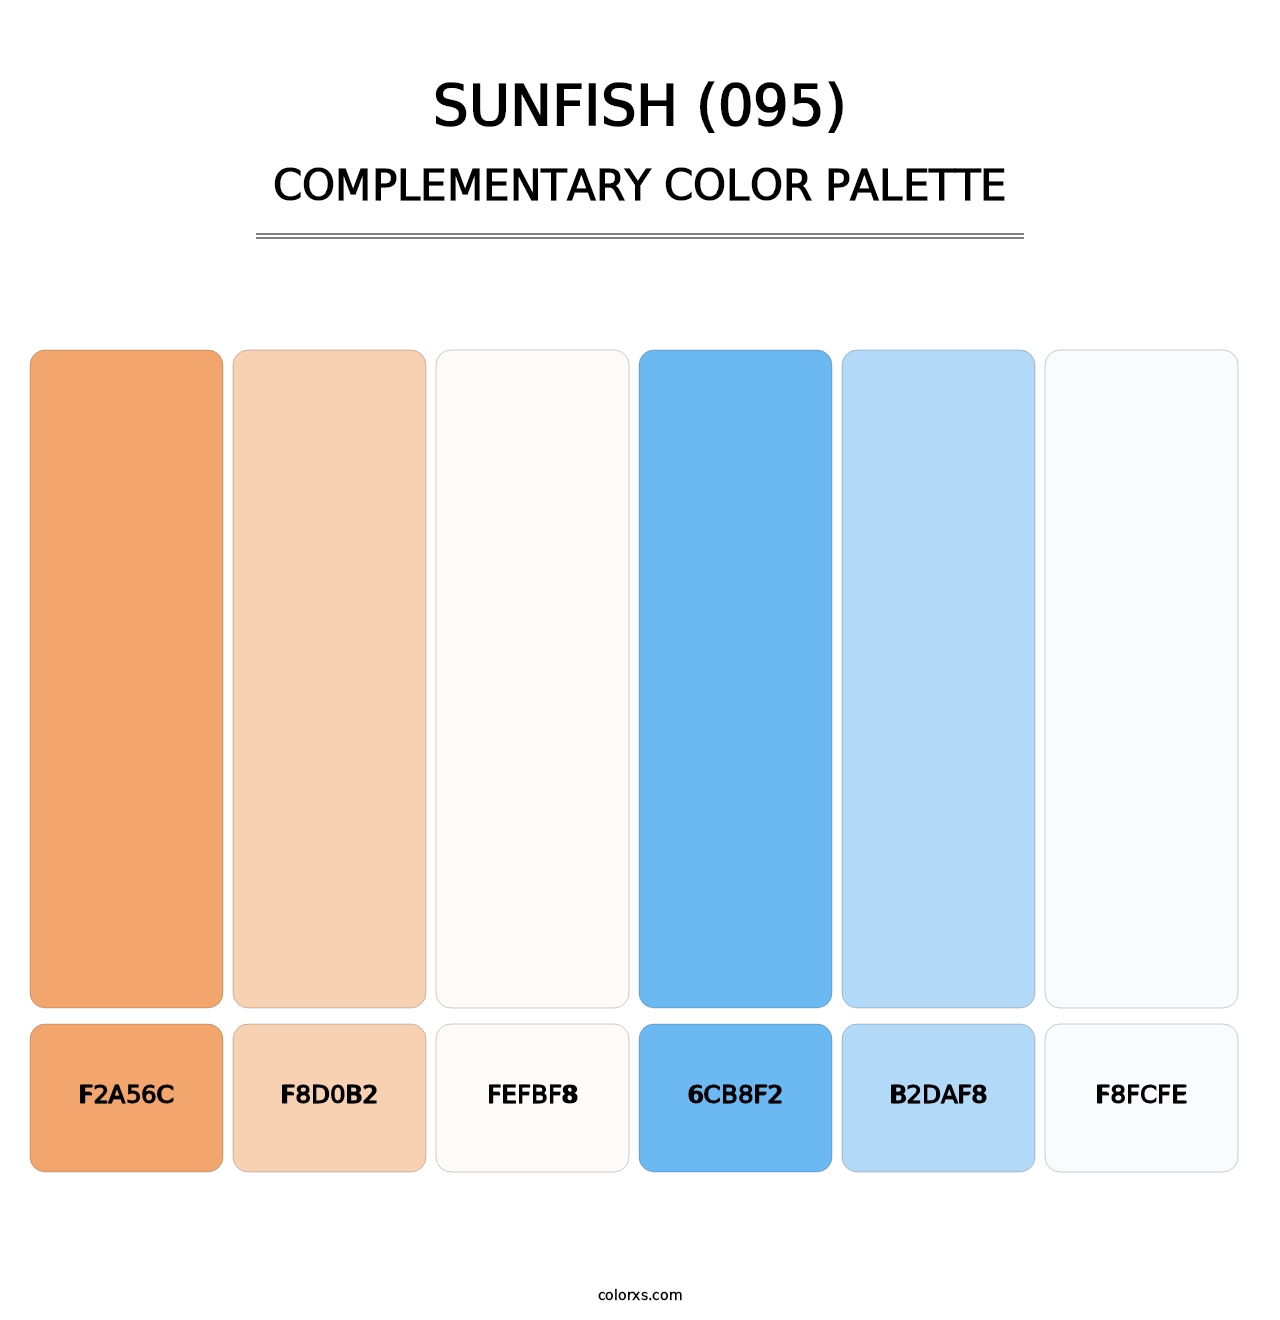 Sunfish (095) - Complementary Color Palette